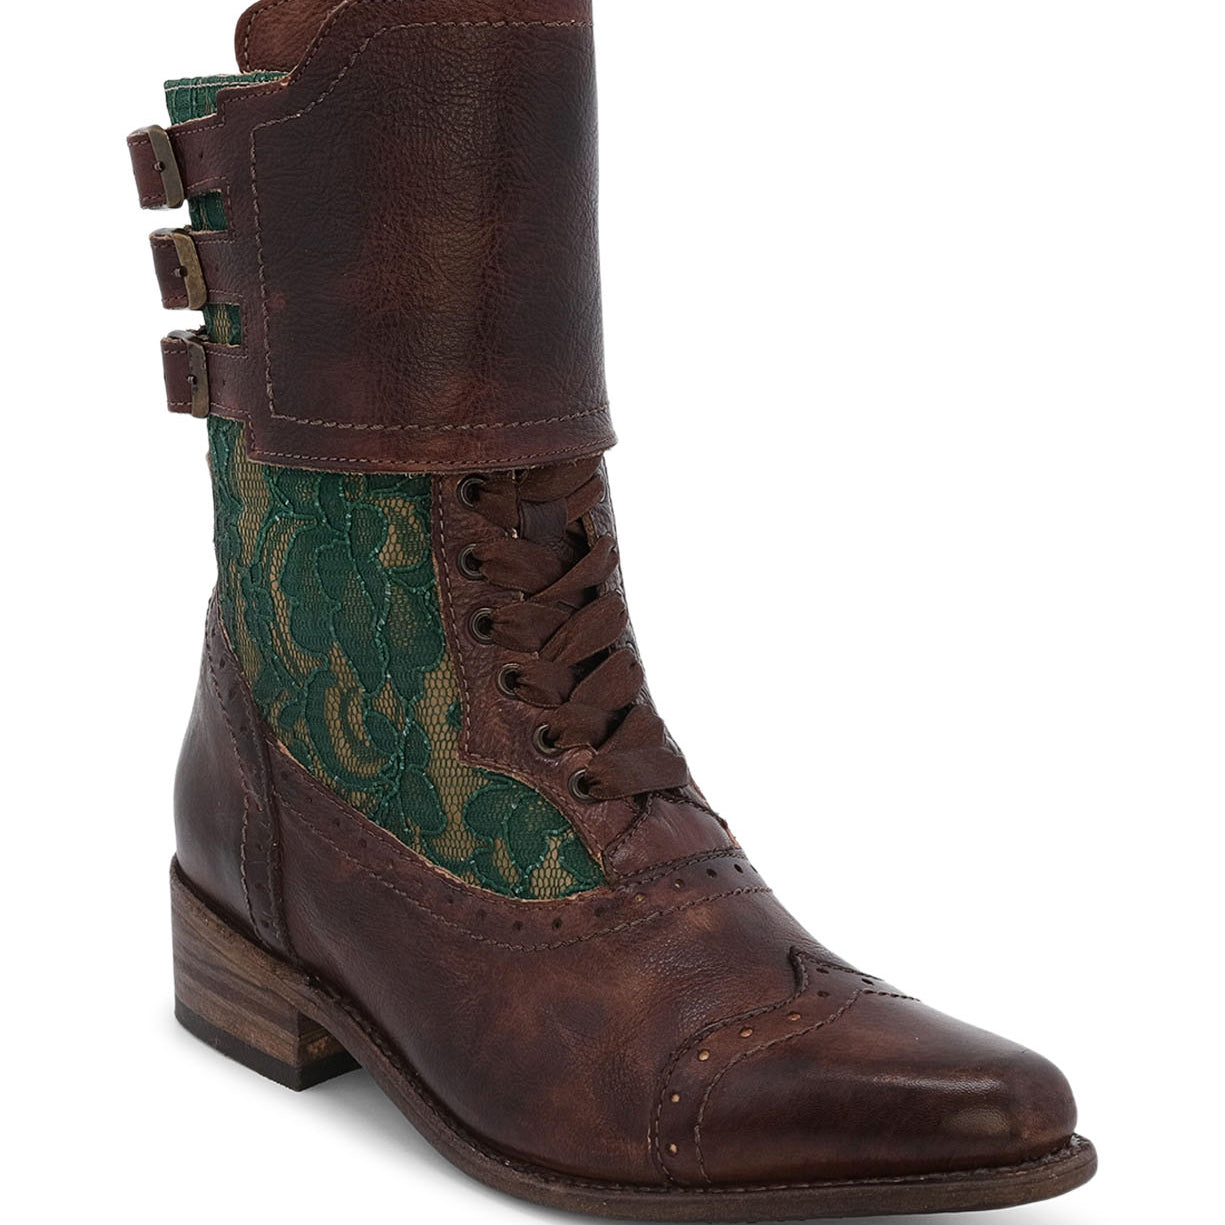 A beautifully crafted Faye leather boot for women in a brown and green color with laces, by Oak Tree Farms.